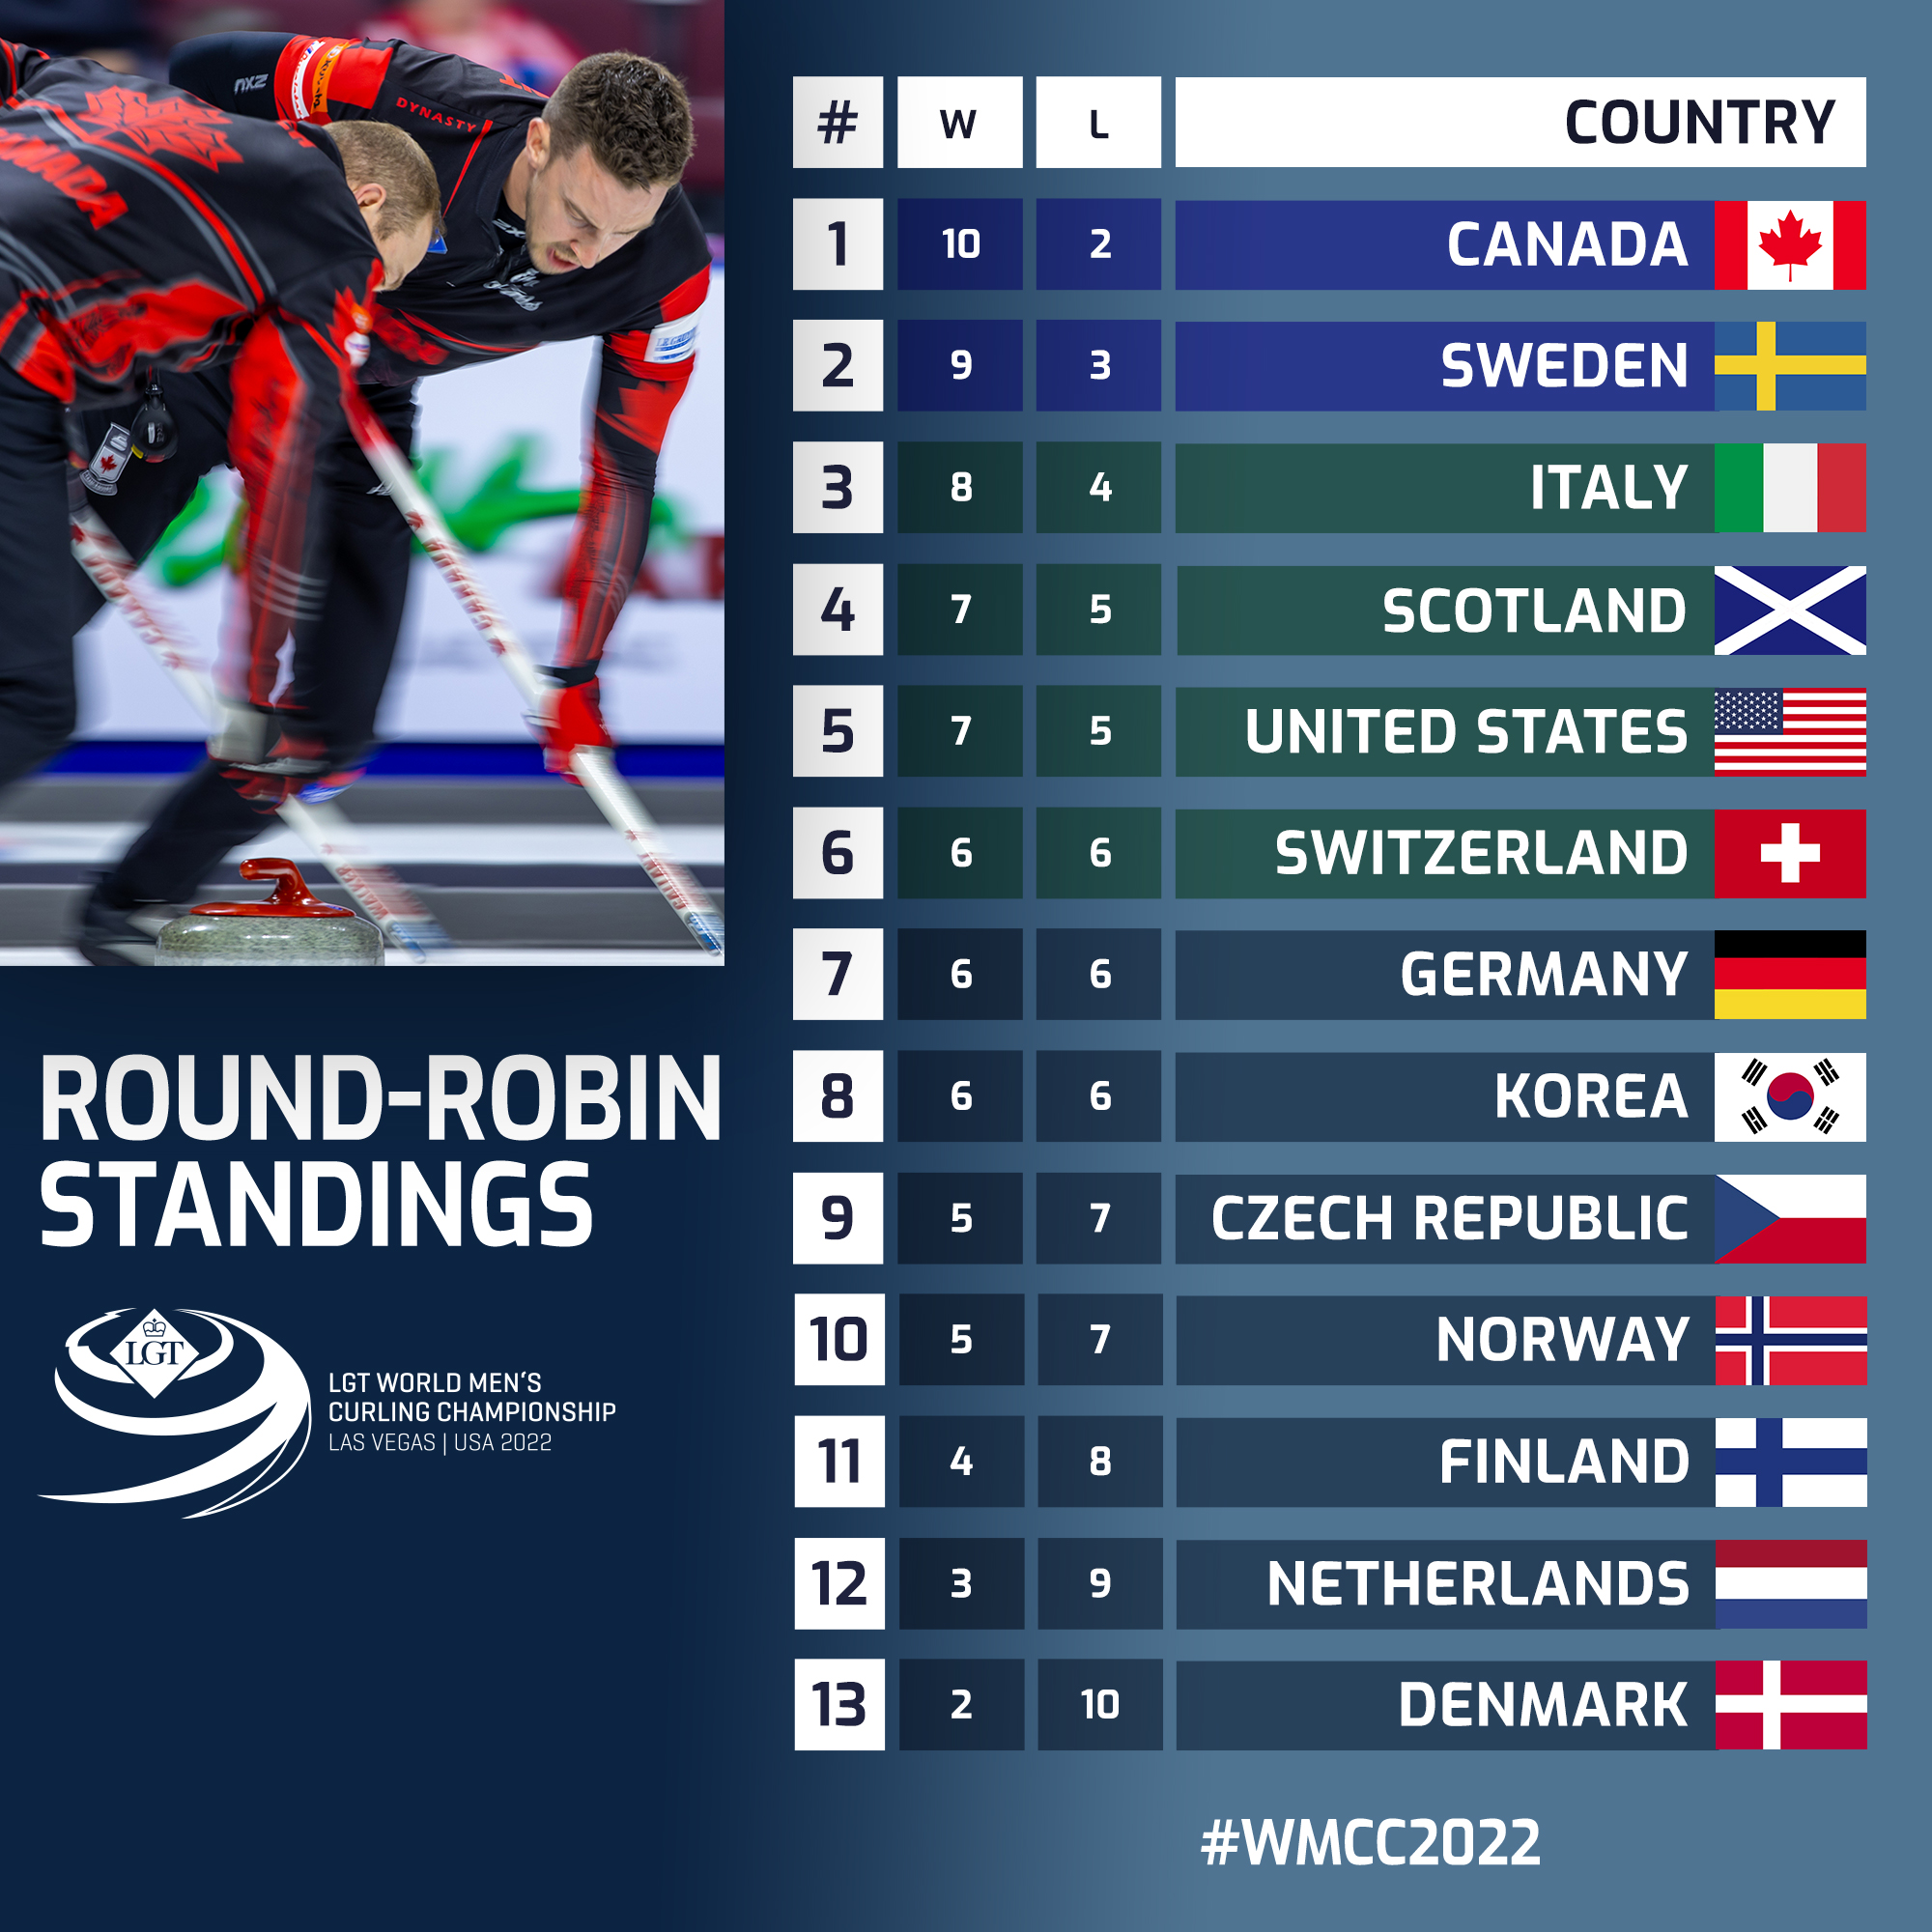 World Curling on Twitter "The final roundrobin standings from the LGT